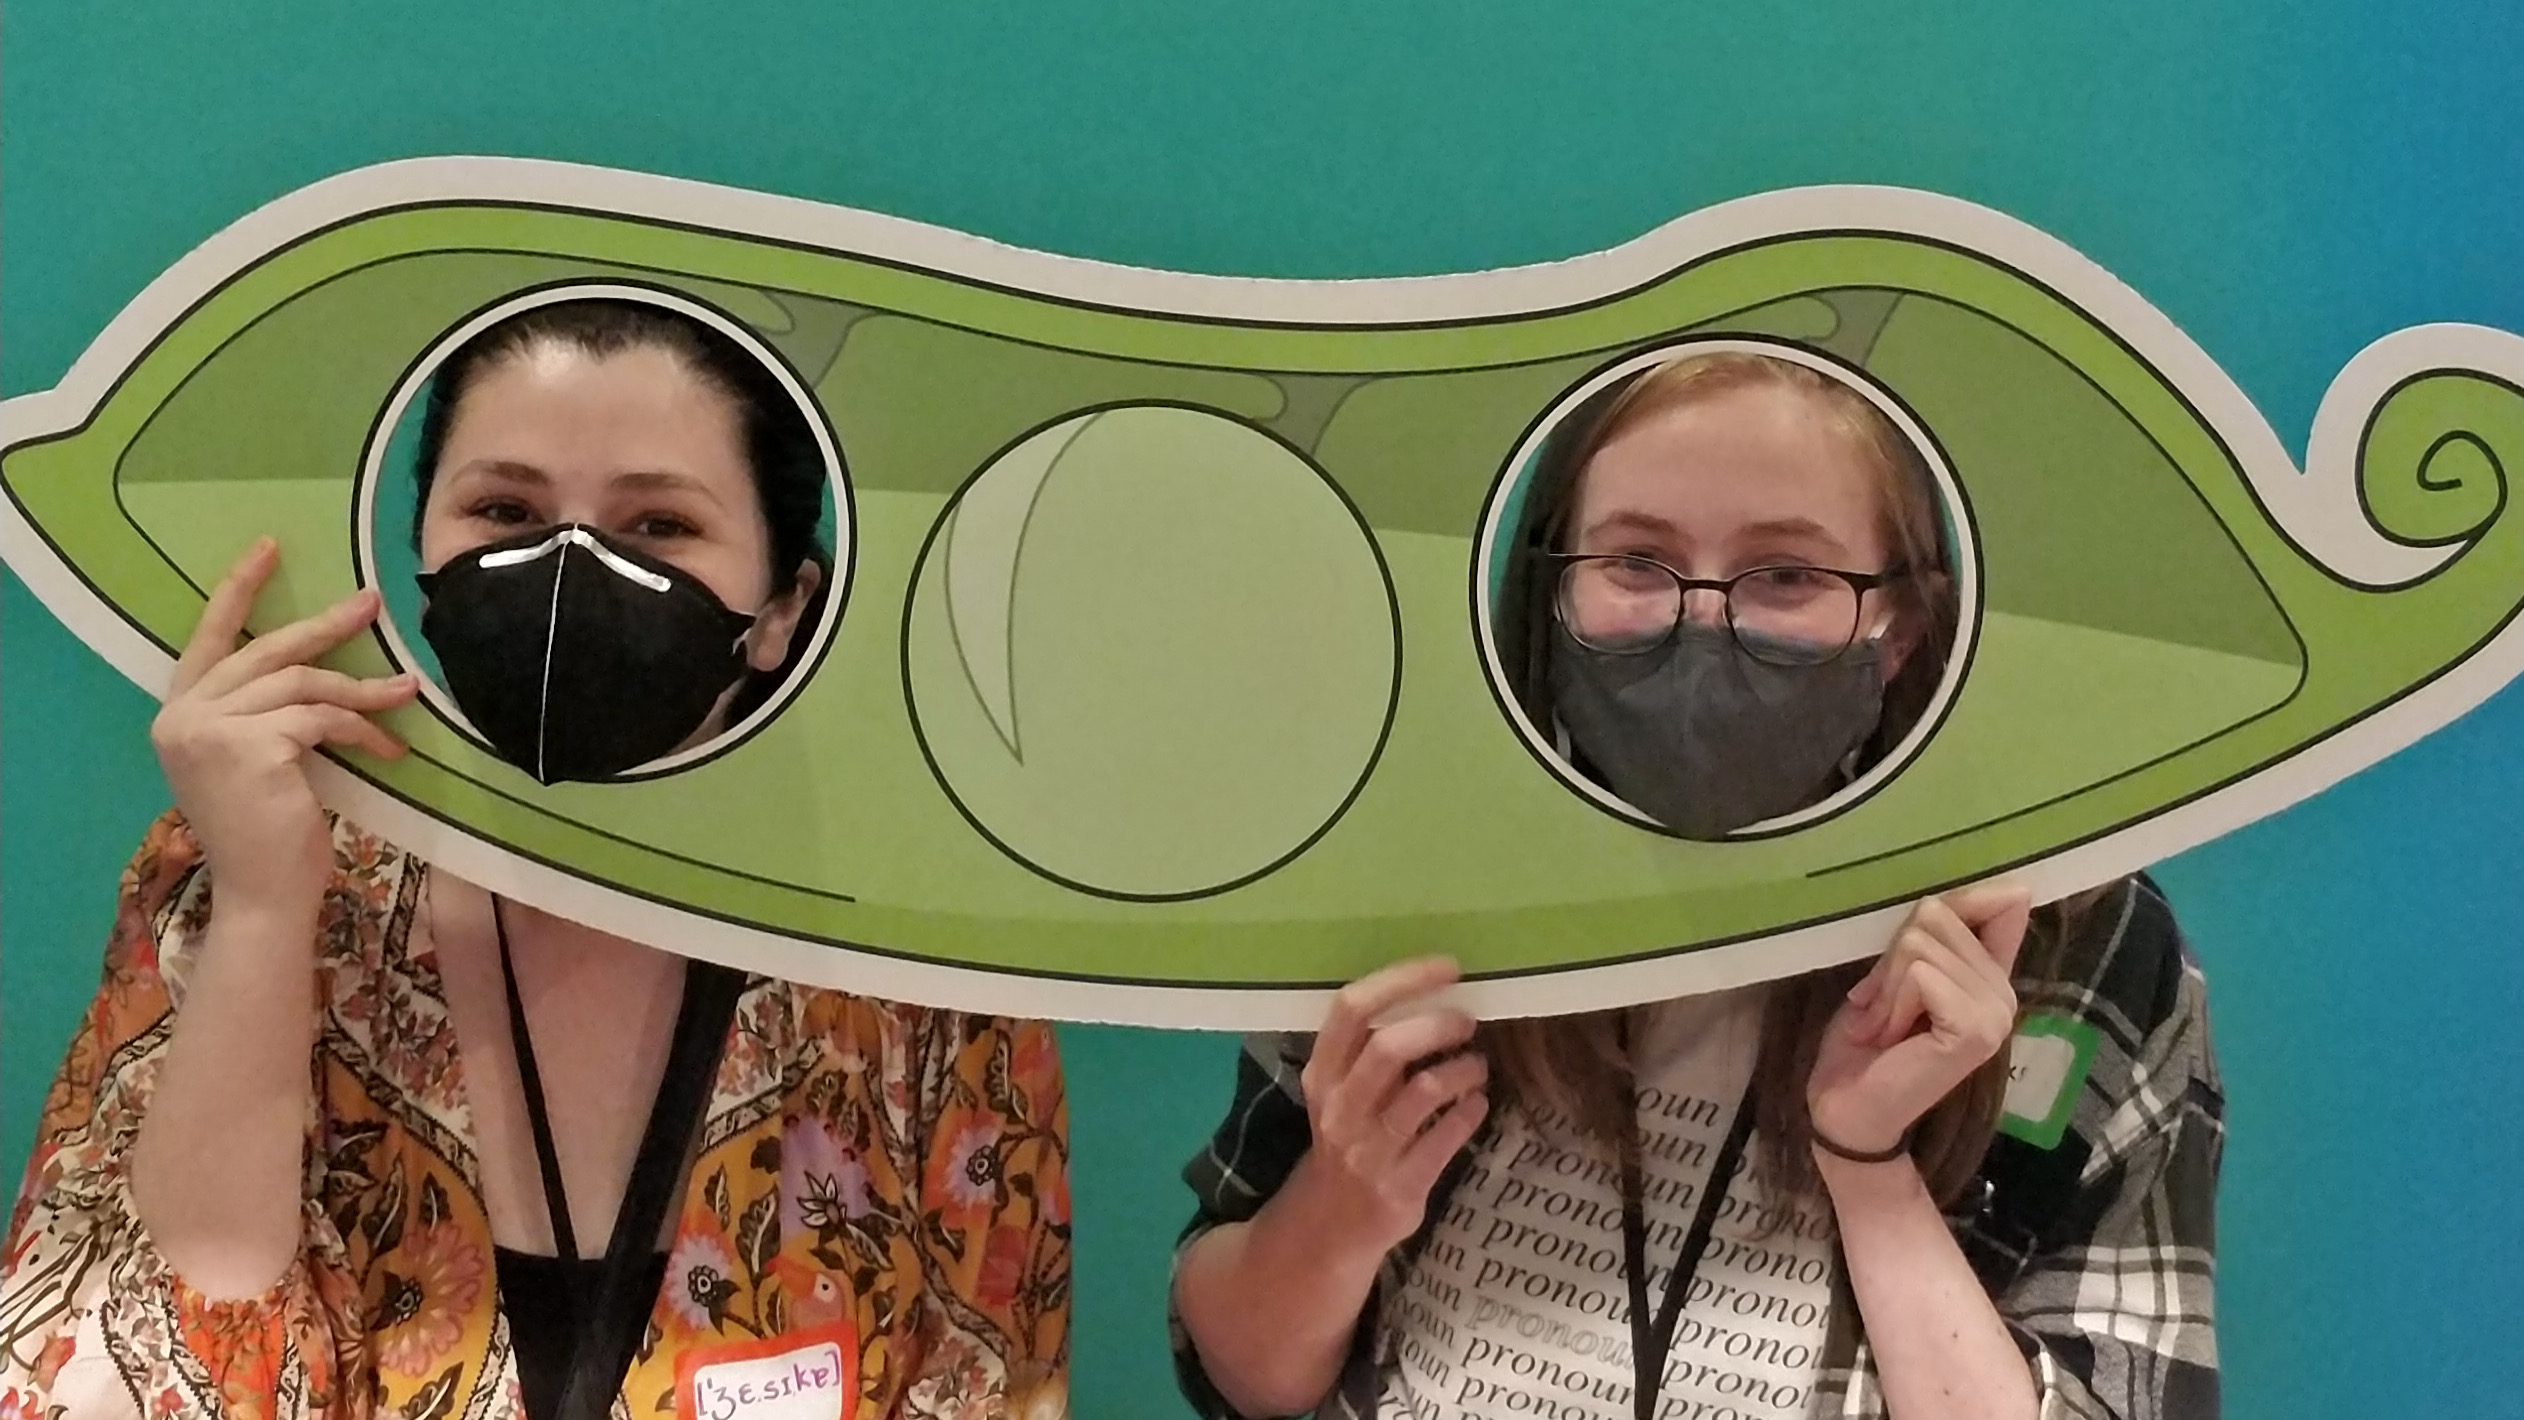 Two young women, their faces showing through holes in a giant cut out of a bean, as if they were two peas in a pod.